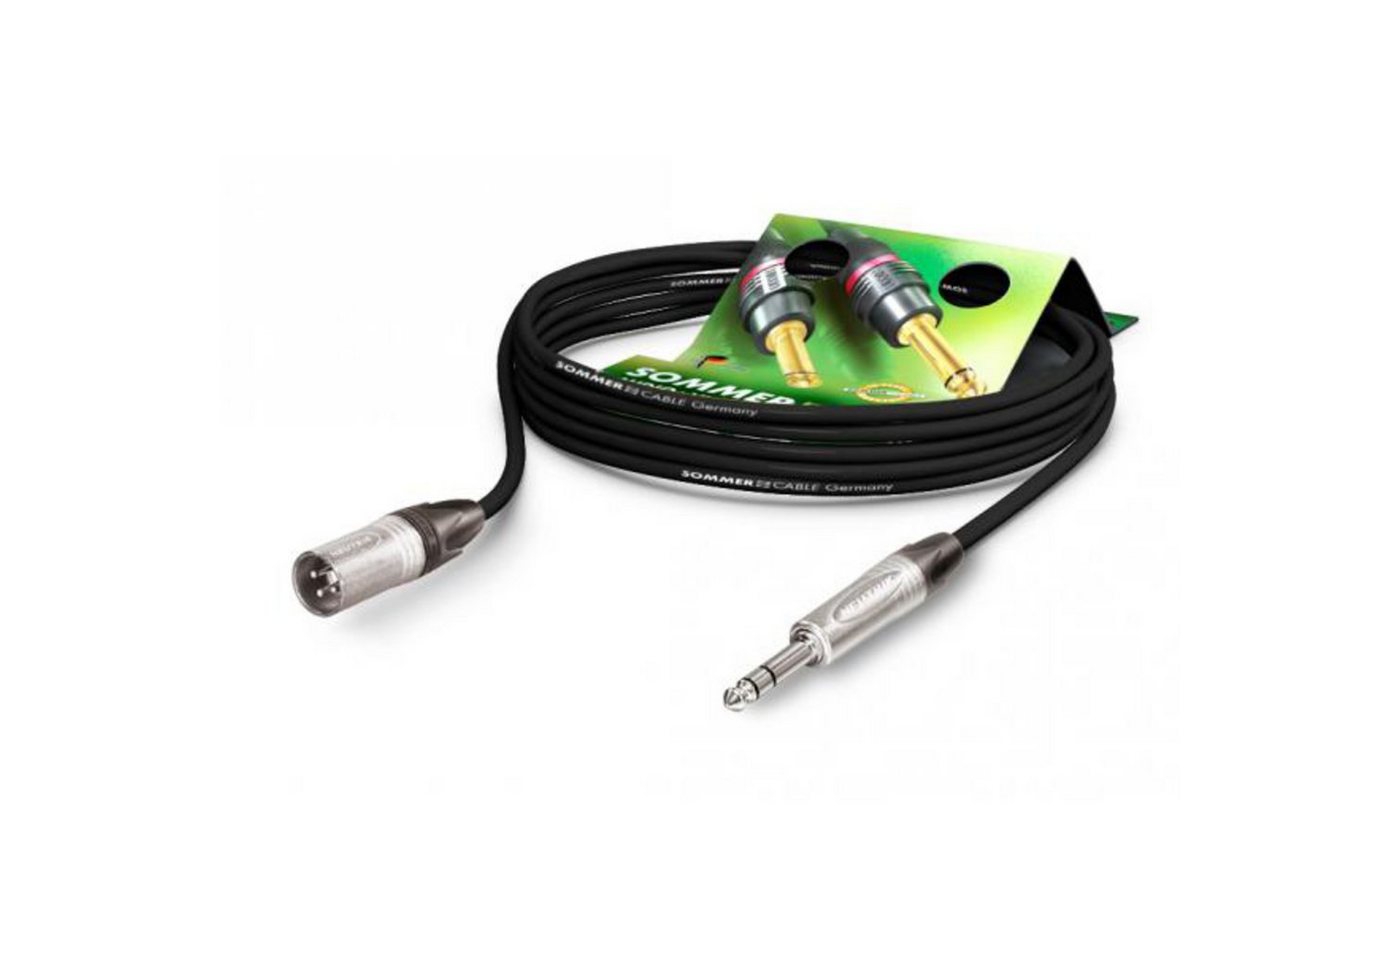 Sommer Cable Audio-Kabel, SGN4-1000-SW Stage 22 HF Mikrofonkabel 10 m - Mikrofonkabel von Sommer Cable